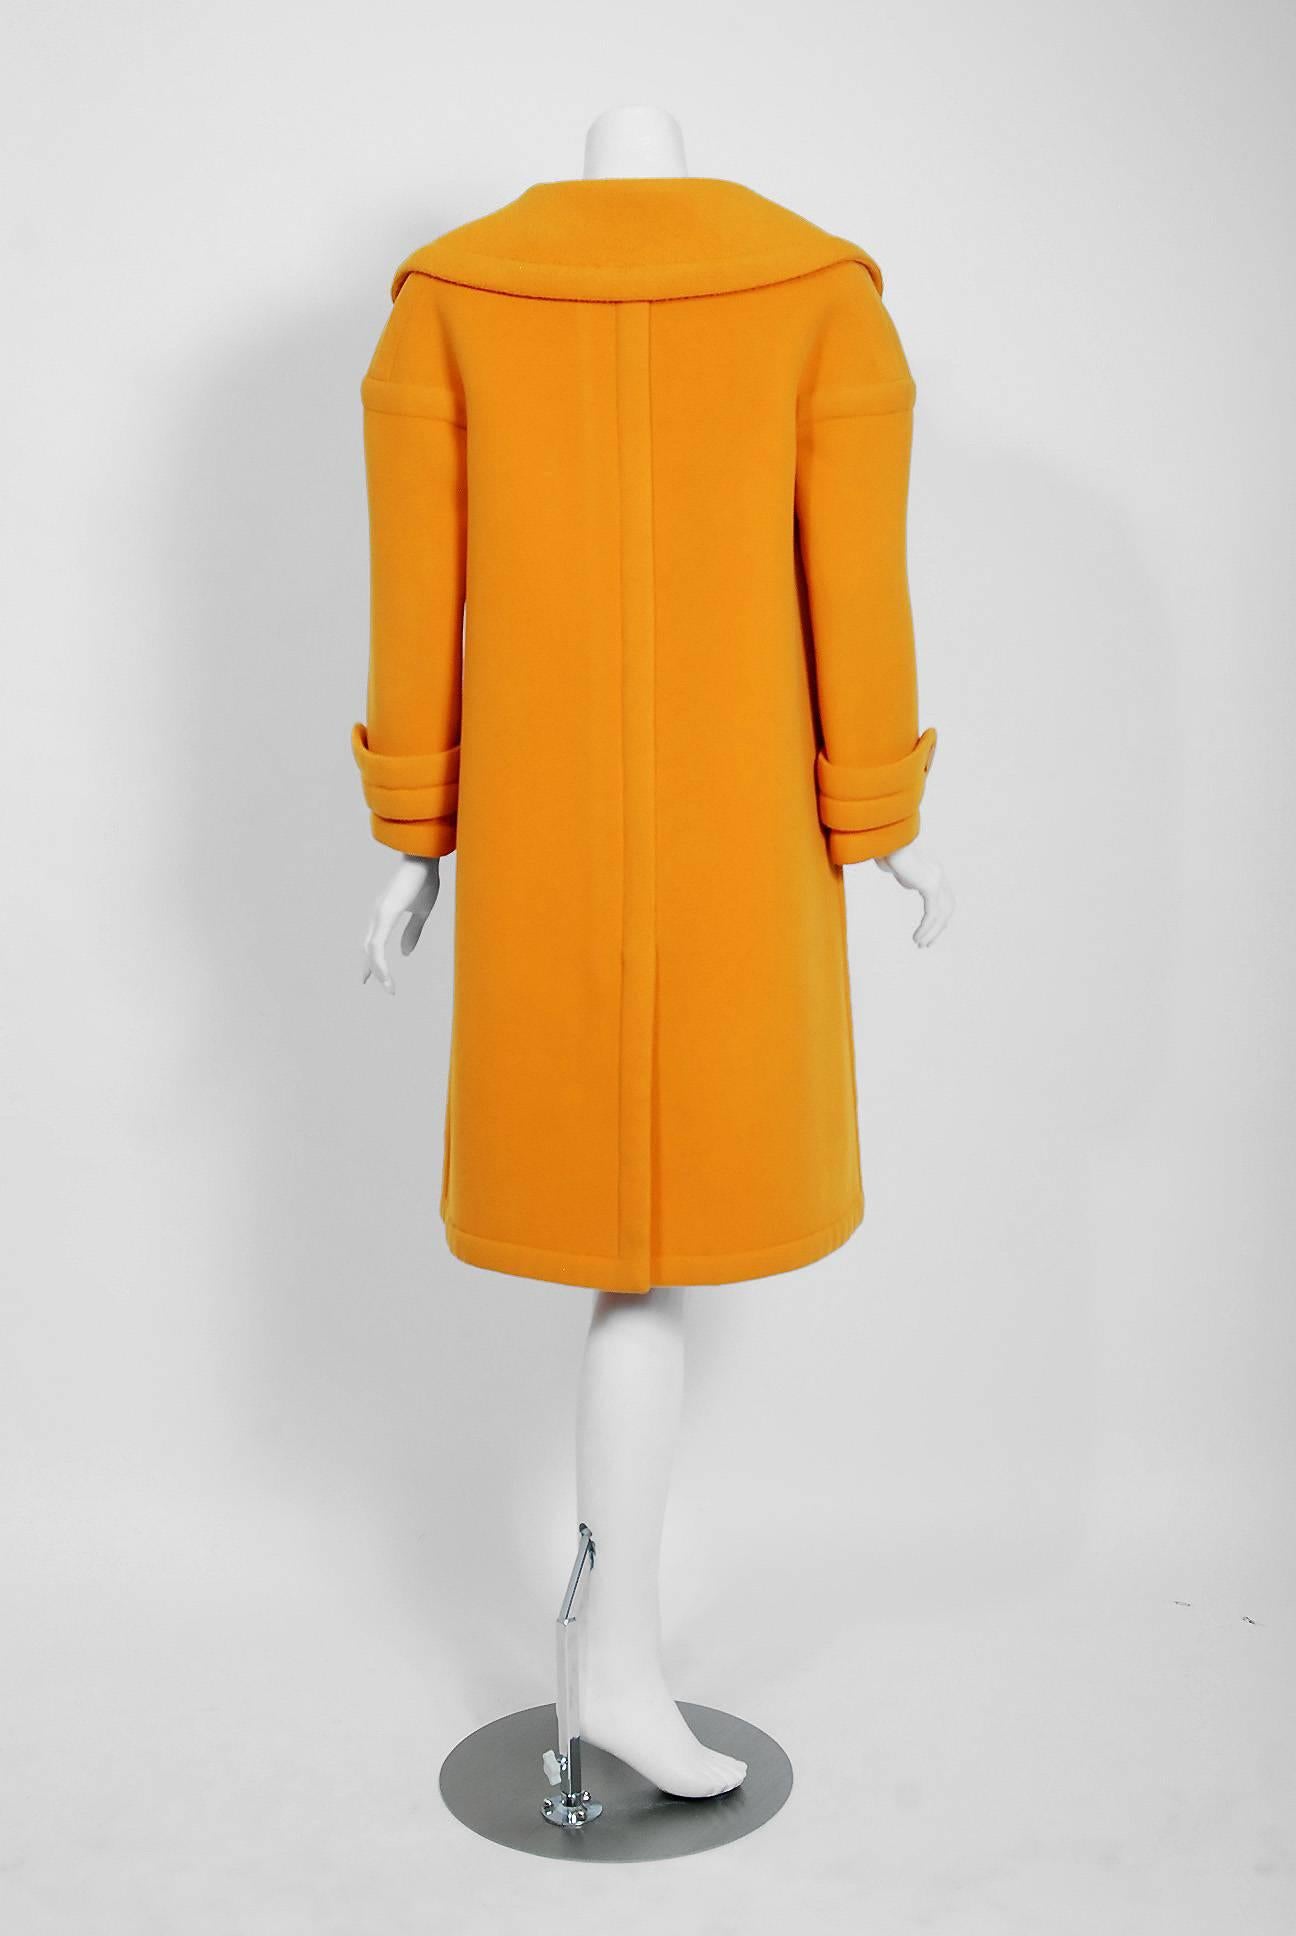 1964 Nina Ricci Haute-Couture Marigold Wool Double Breasted Sculpted Mod Coat 1